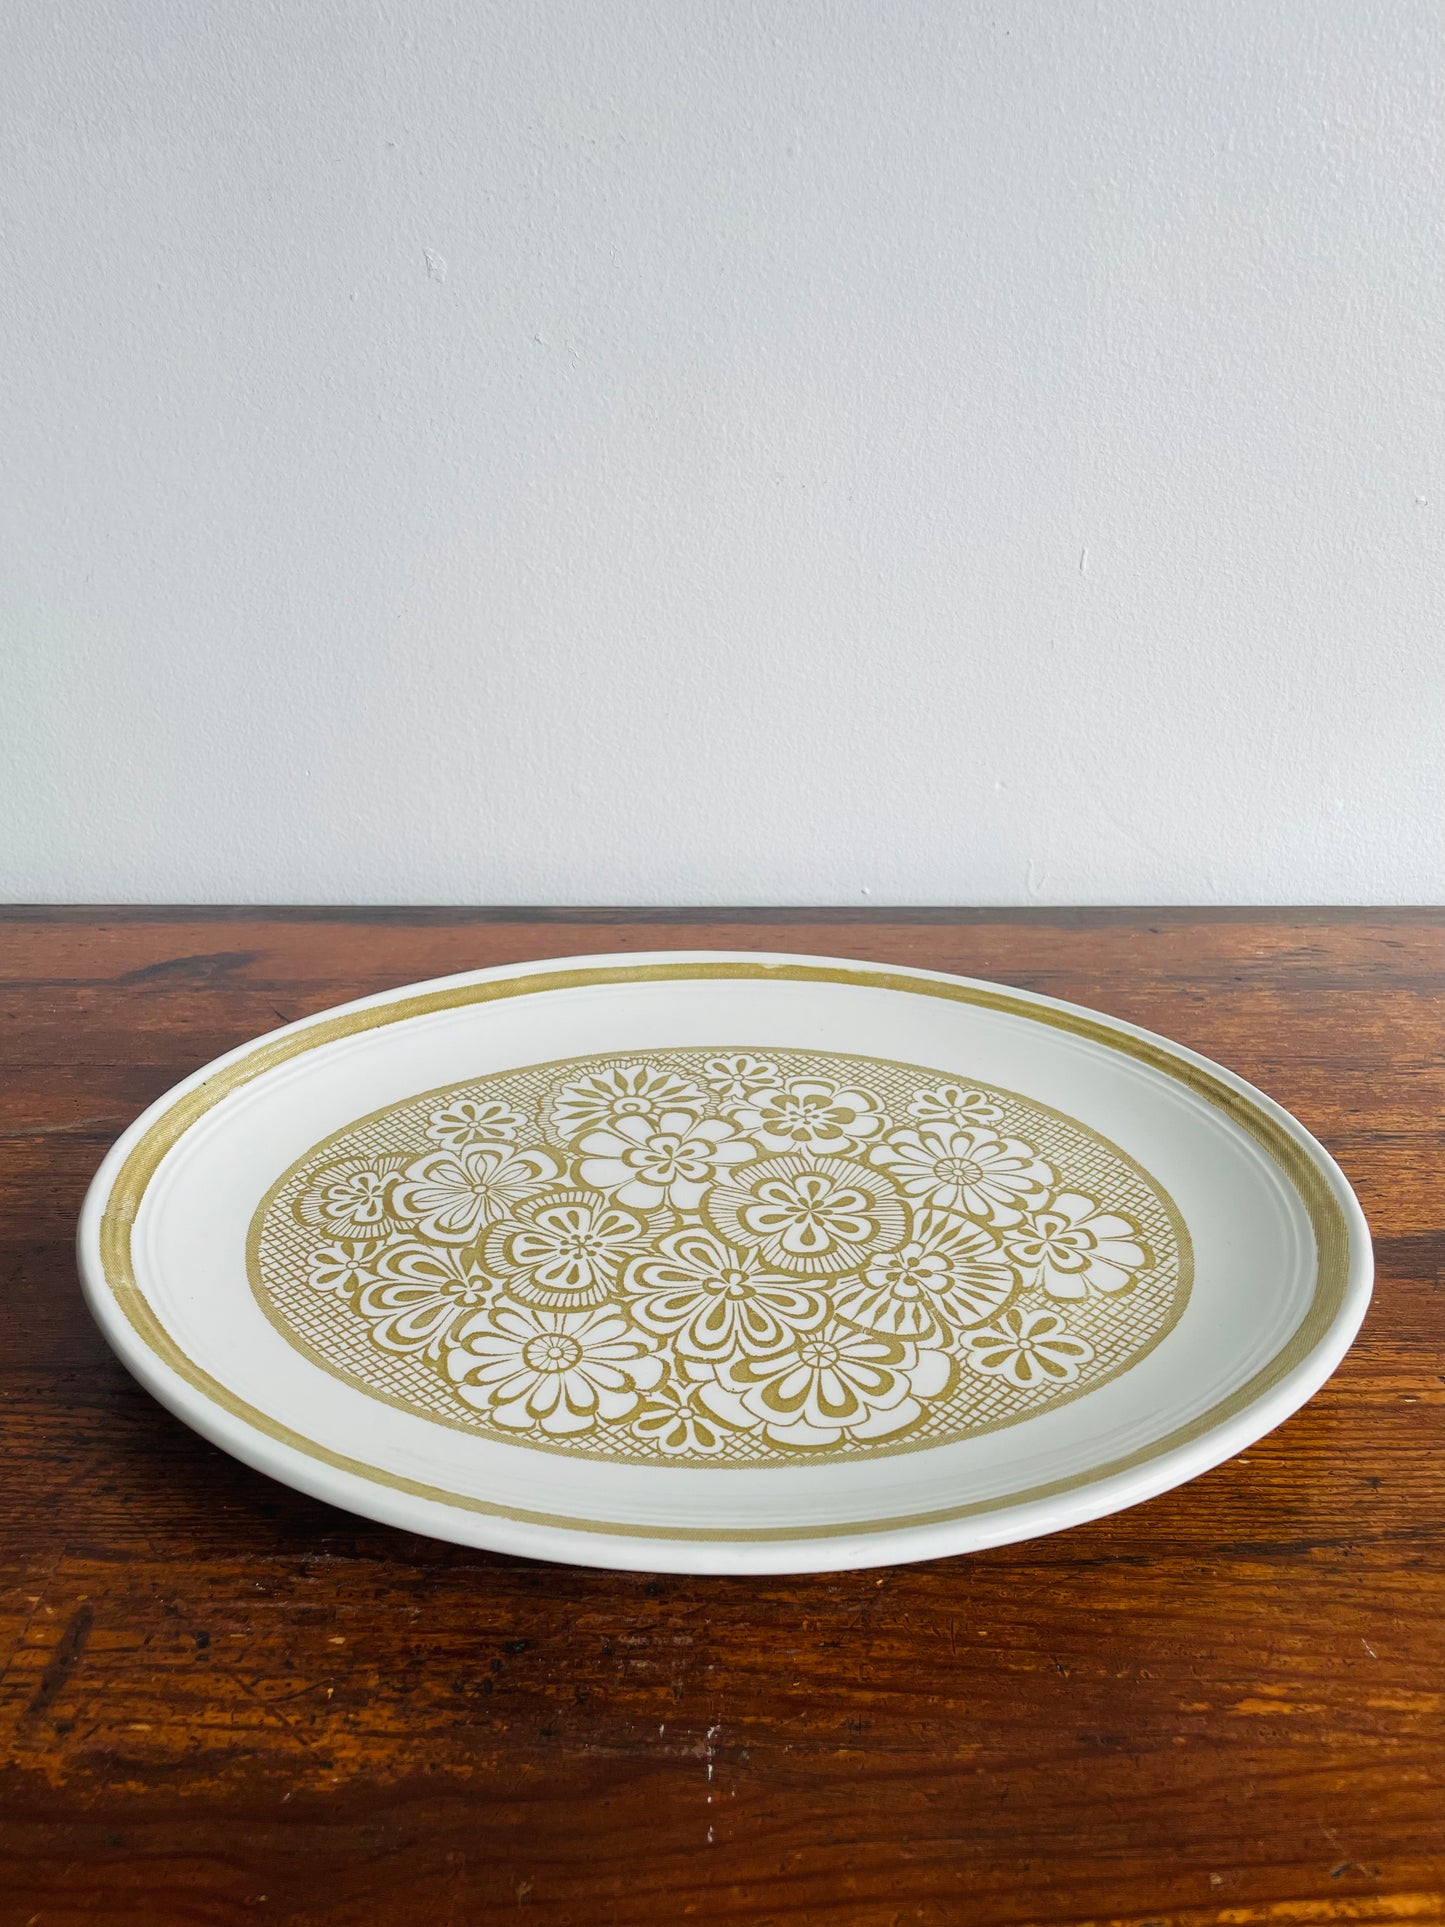 Myott Cloister 12" Oval Plate or Serving Dish with Groovy Green Flowers - Made in England